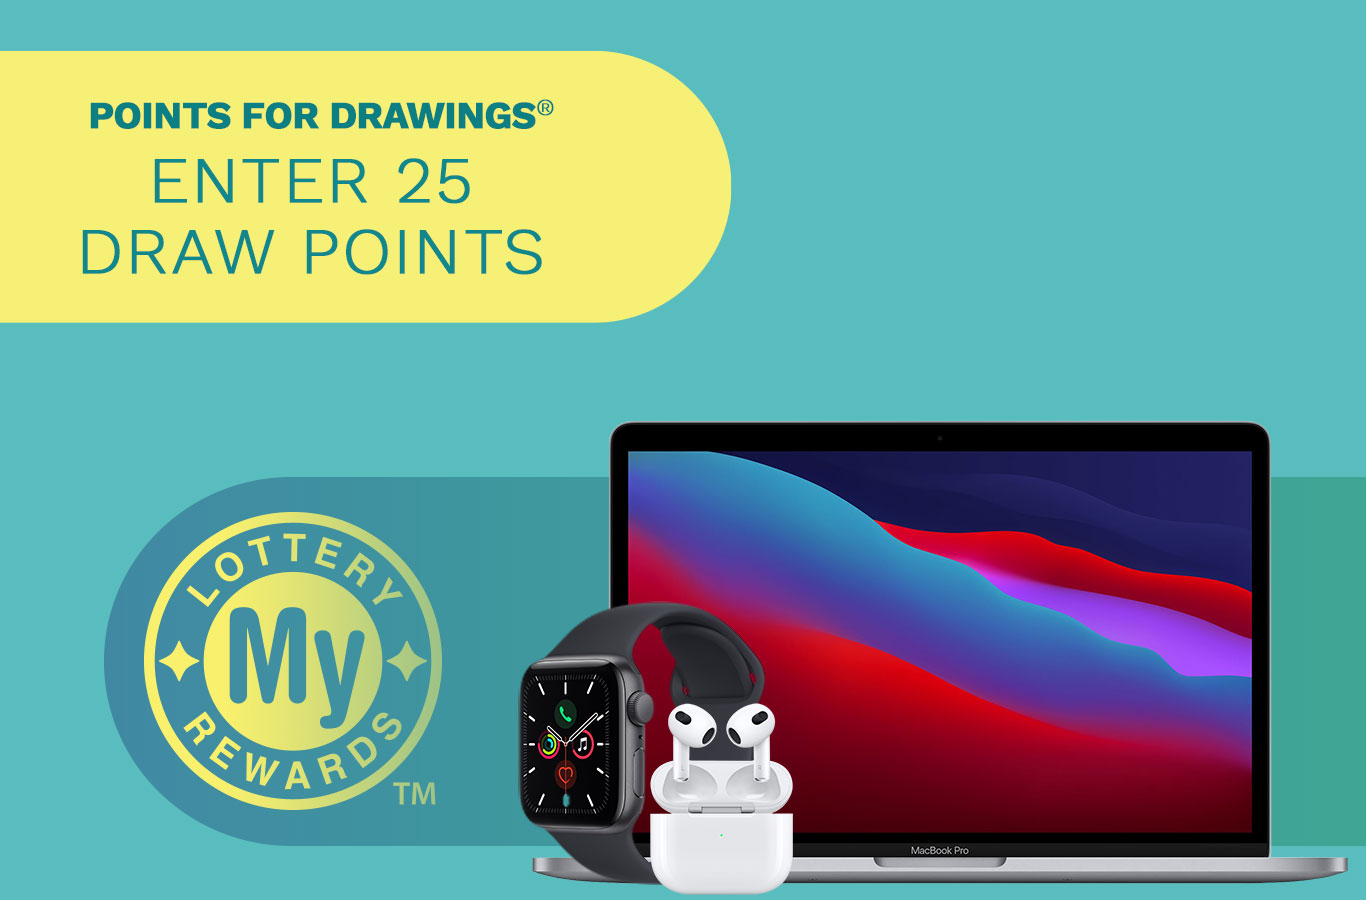 Here's your chance to win an Apple® Tech Package! Enter by Monday, November 21st.